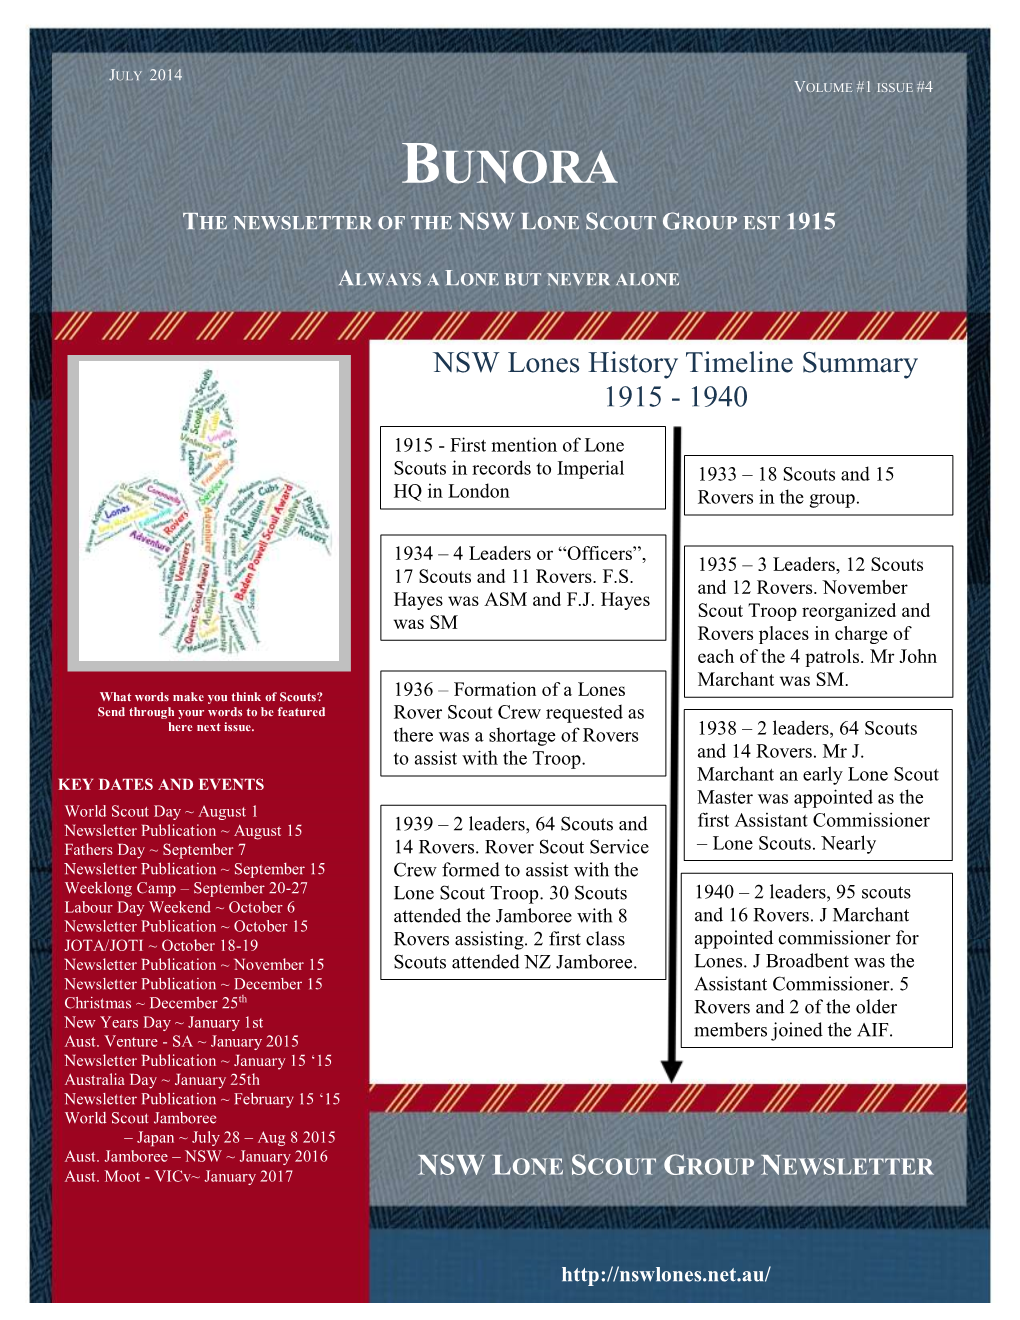 Bunora the Newsletter of the Nsw Lone Scout Group Est 1915